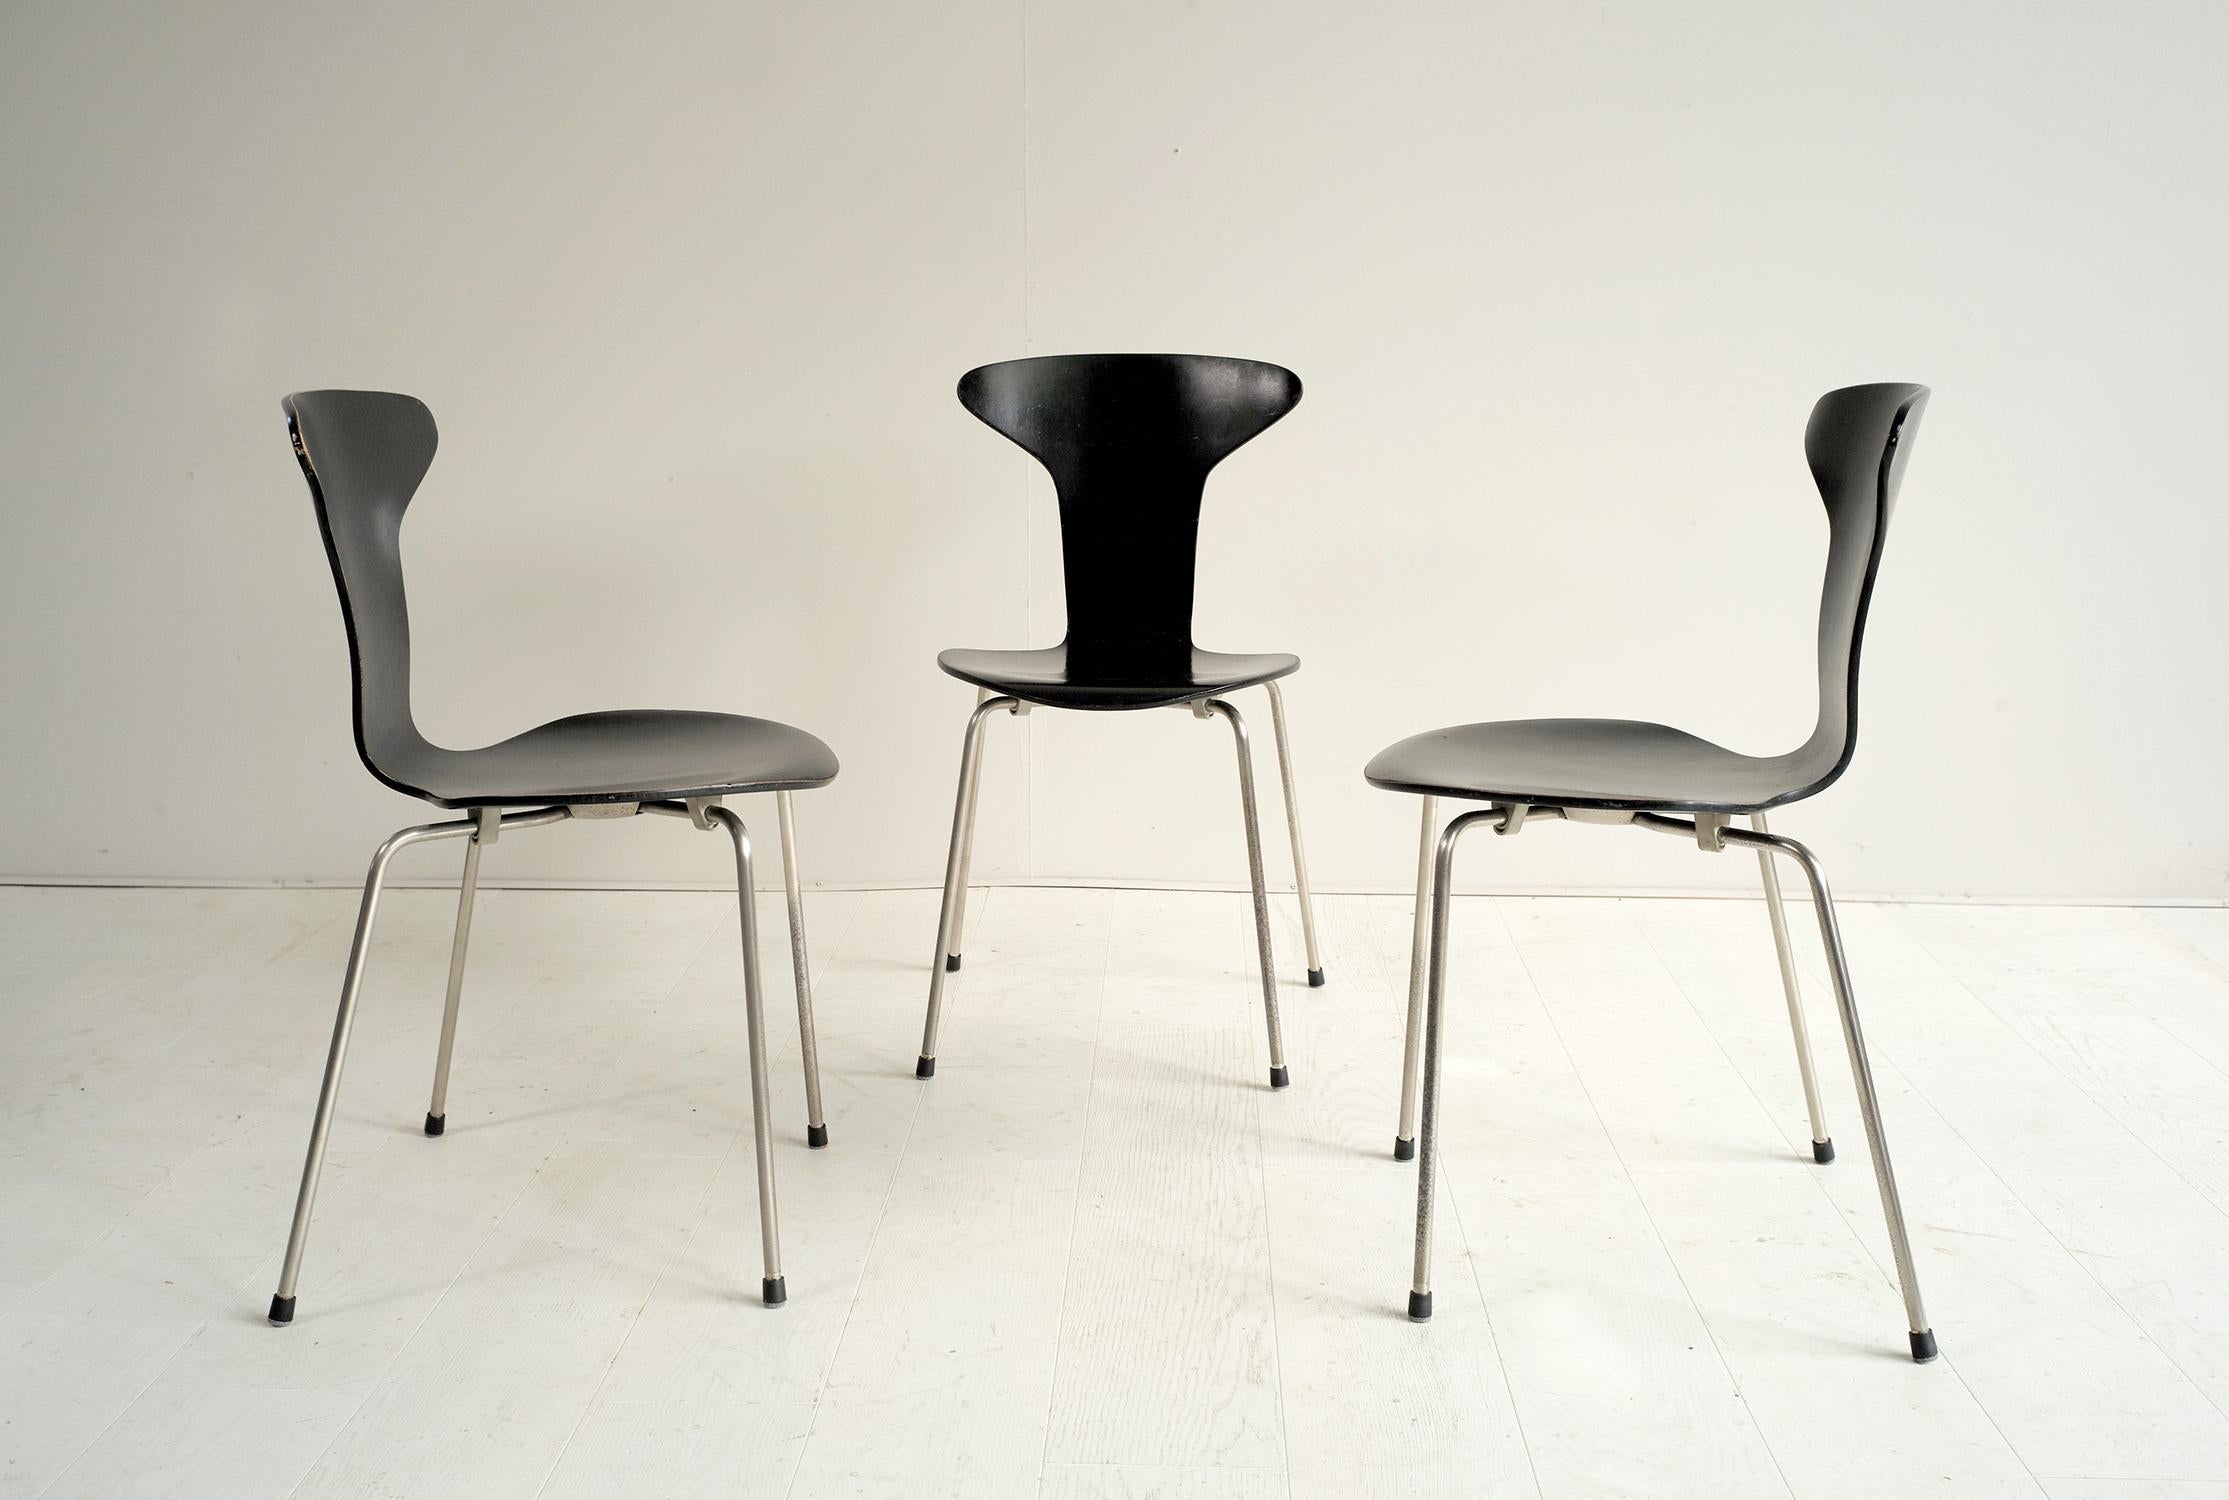 Arne Jacobsen, Set of 3 Chairs 